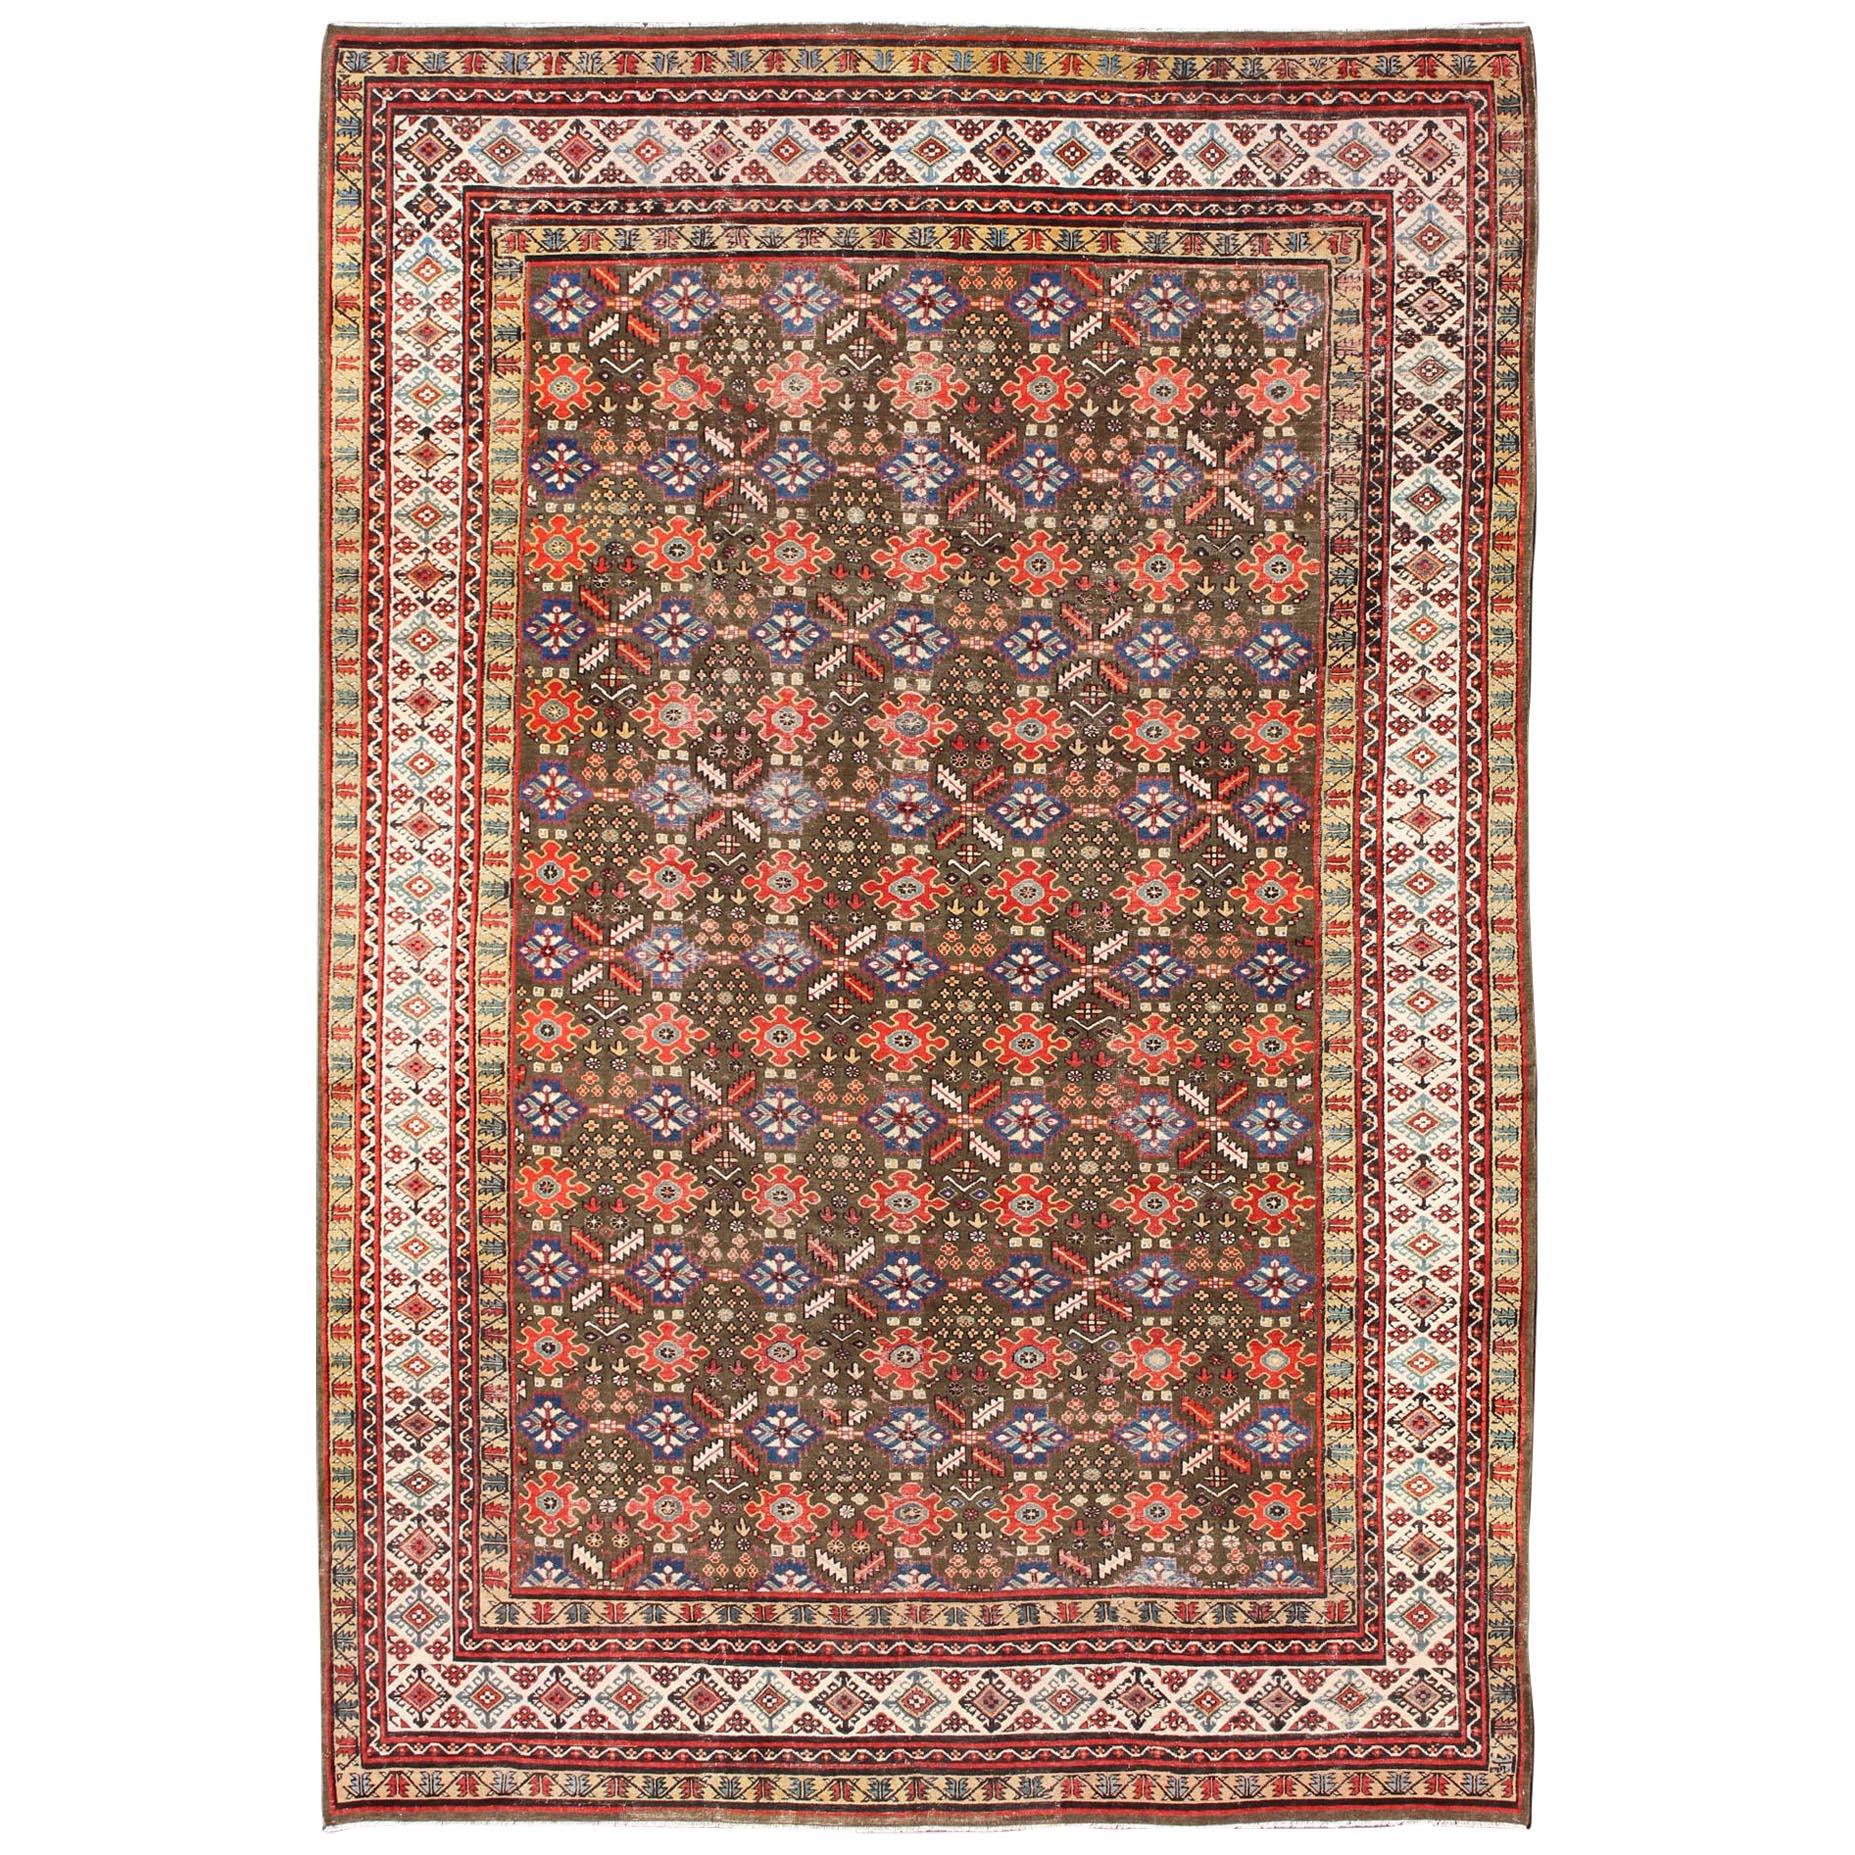 Large Antique Kurdish Rug with All-Over Design in Brown/Green, Red, and Blue